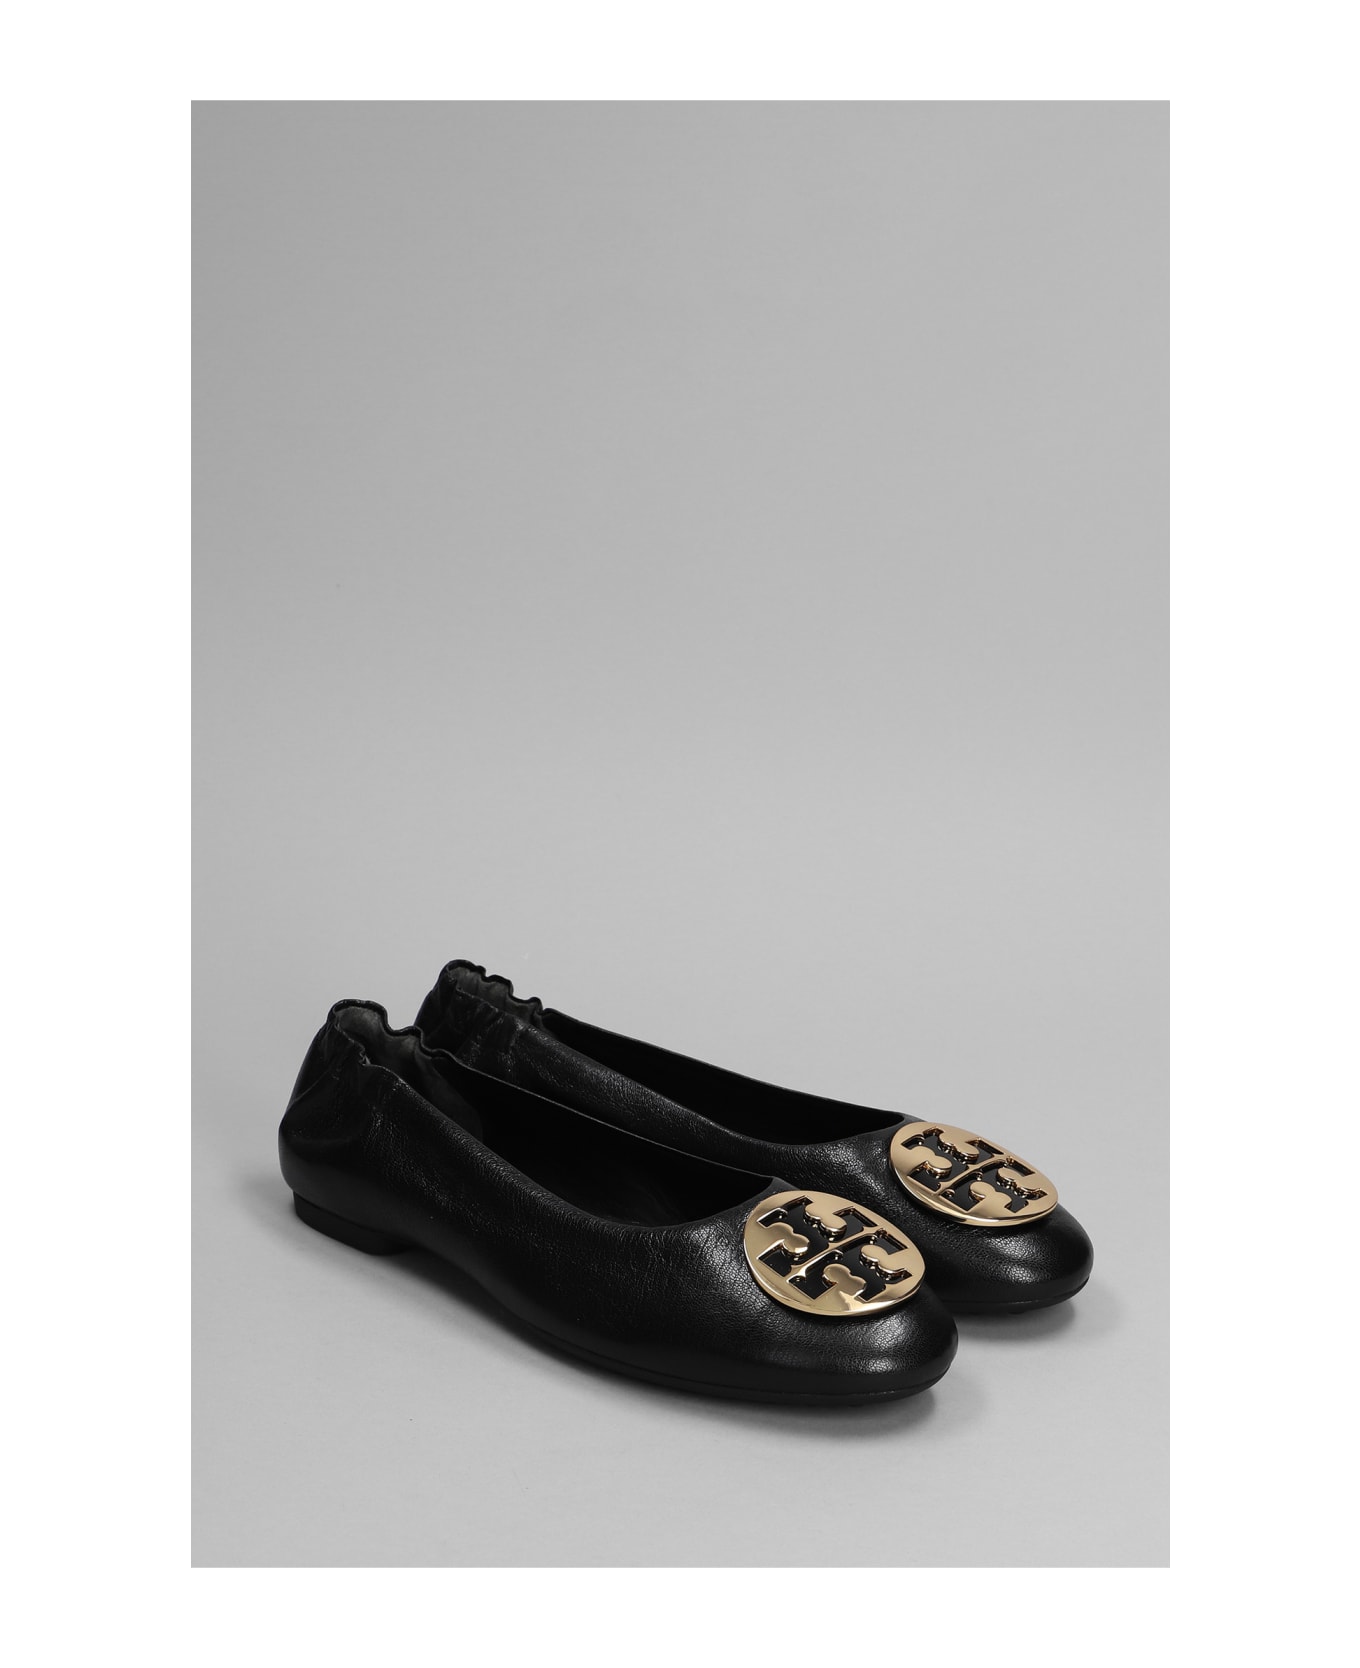 Tory Burch Ballet Flats In Black Leather - black